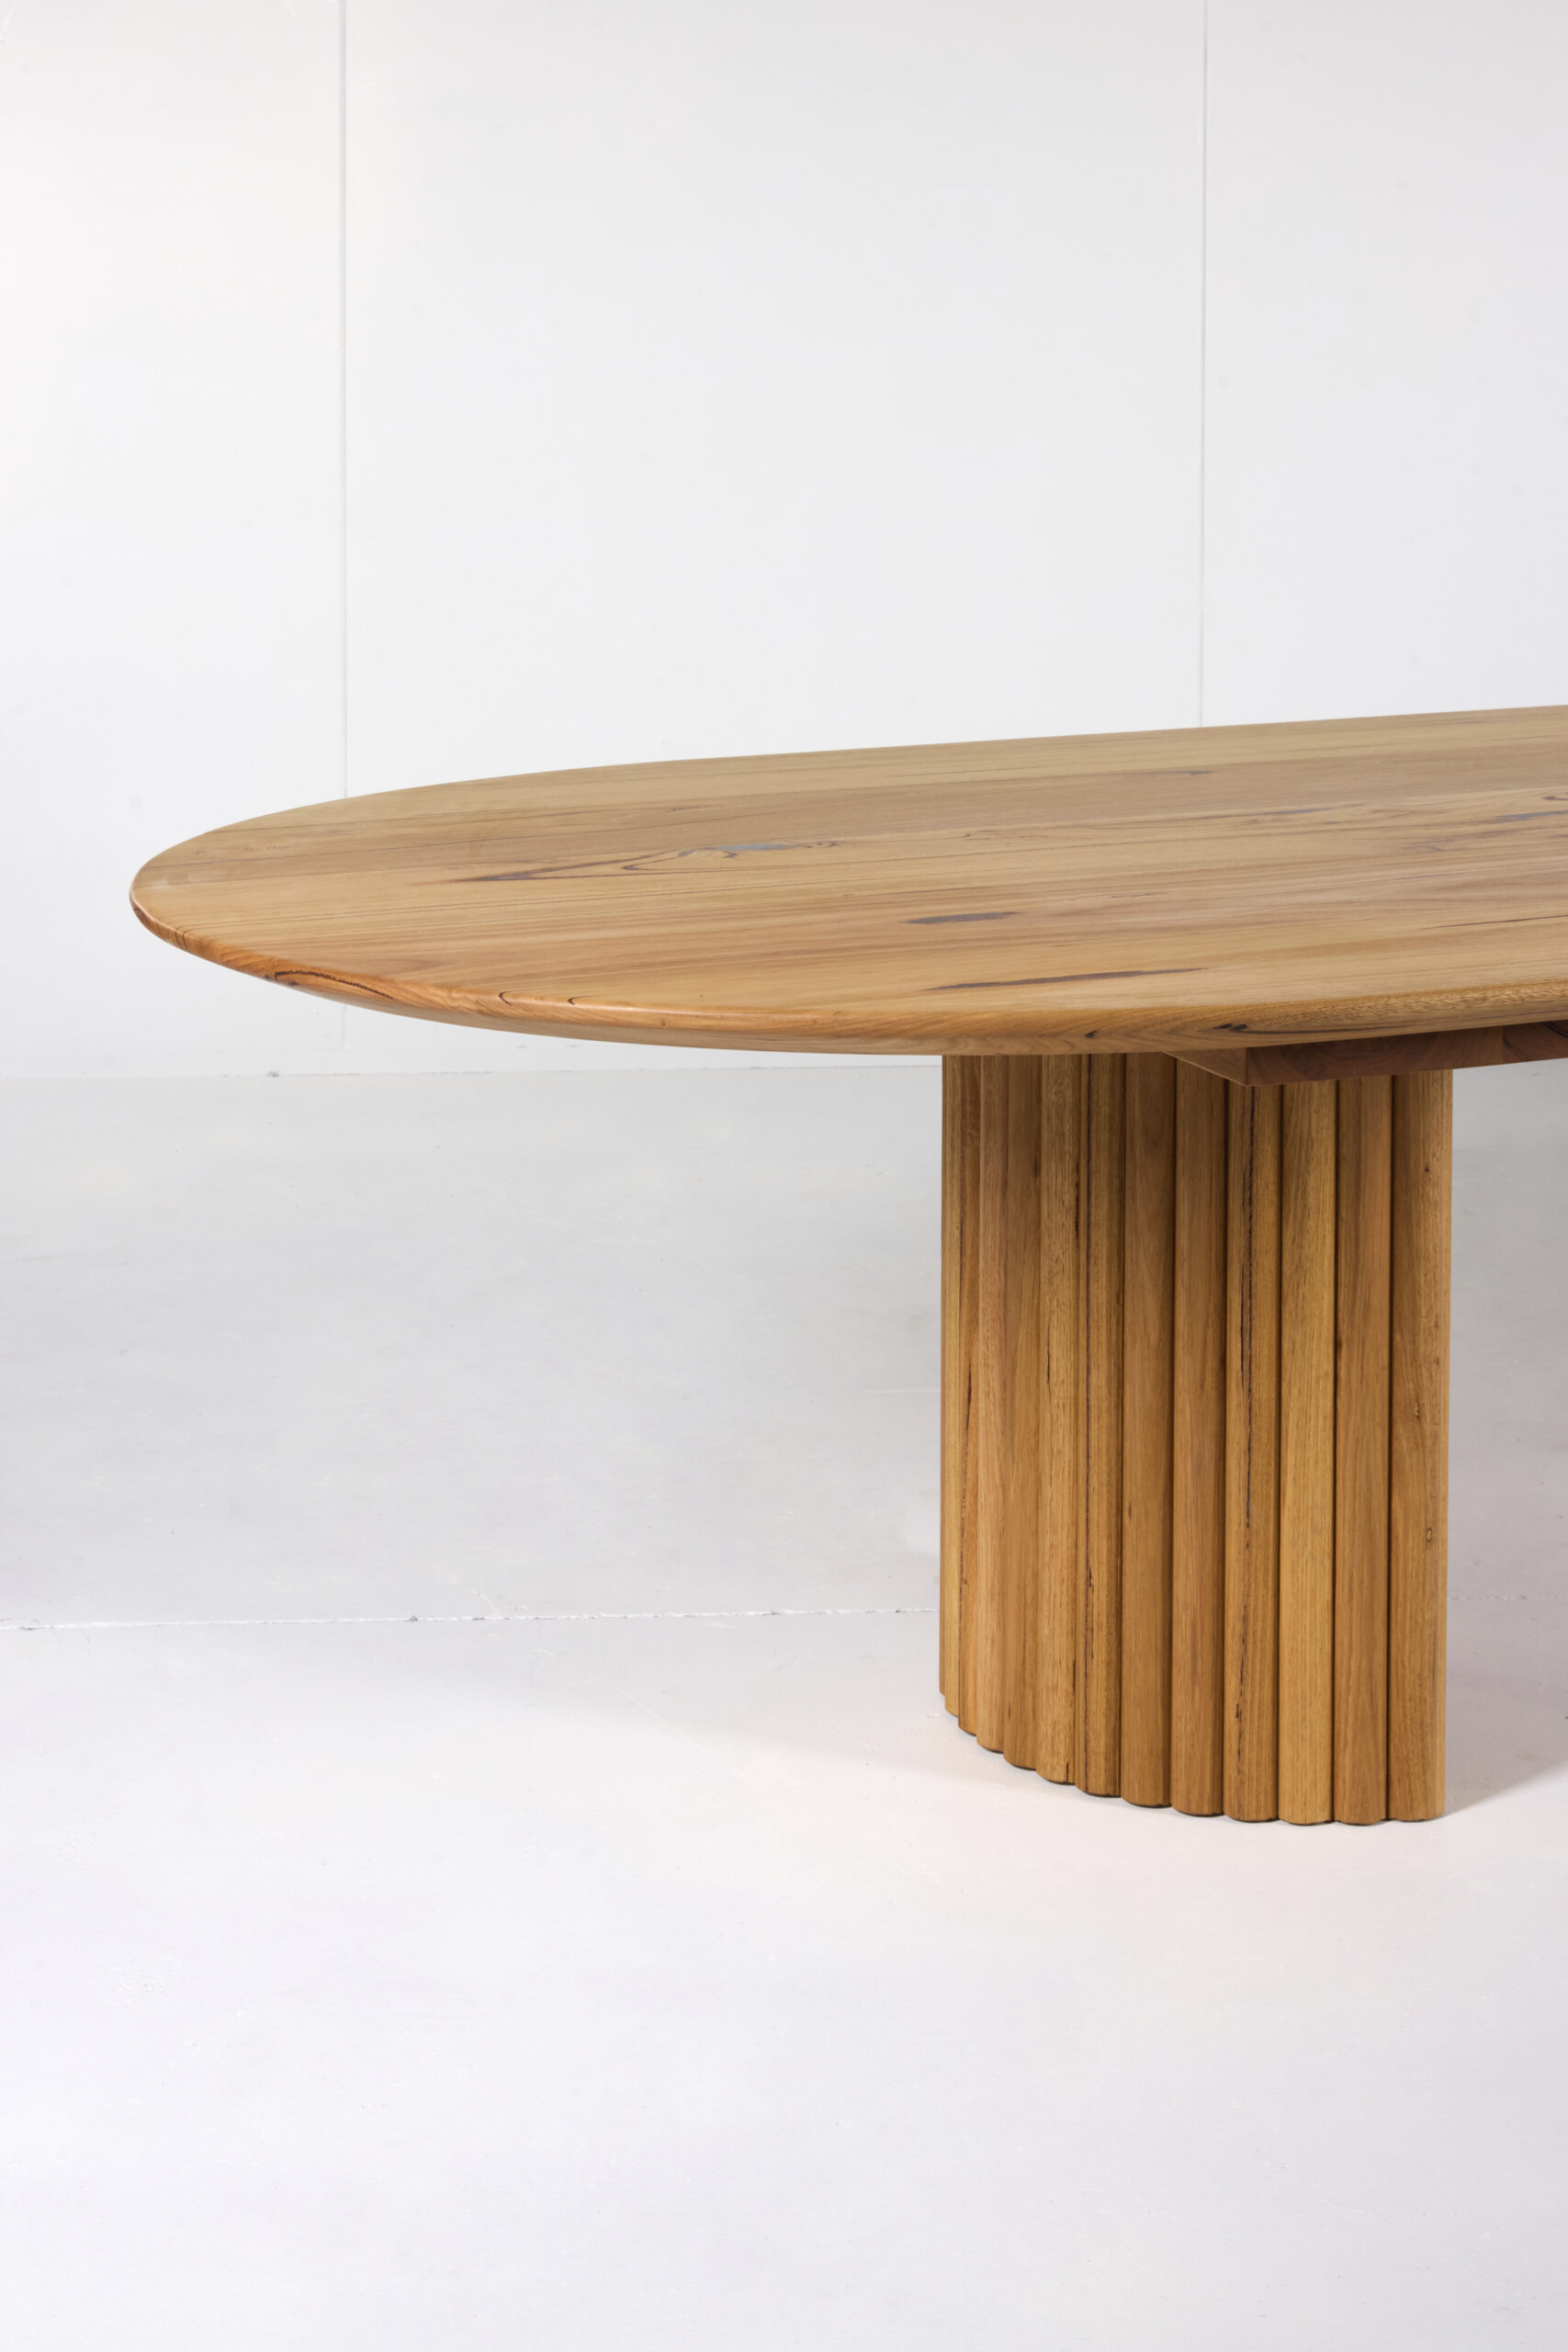 Elegant and modern Nadika Dining Table featuring a solid hardwood frame, high-gloss lacquer finish, and clean lines. The table seats six to eight people and is available in various finishes such as rich walnut and sleek black.